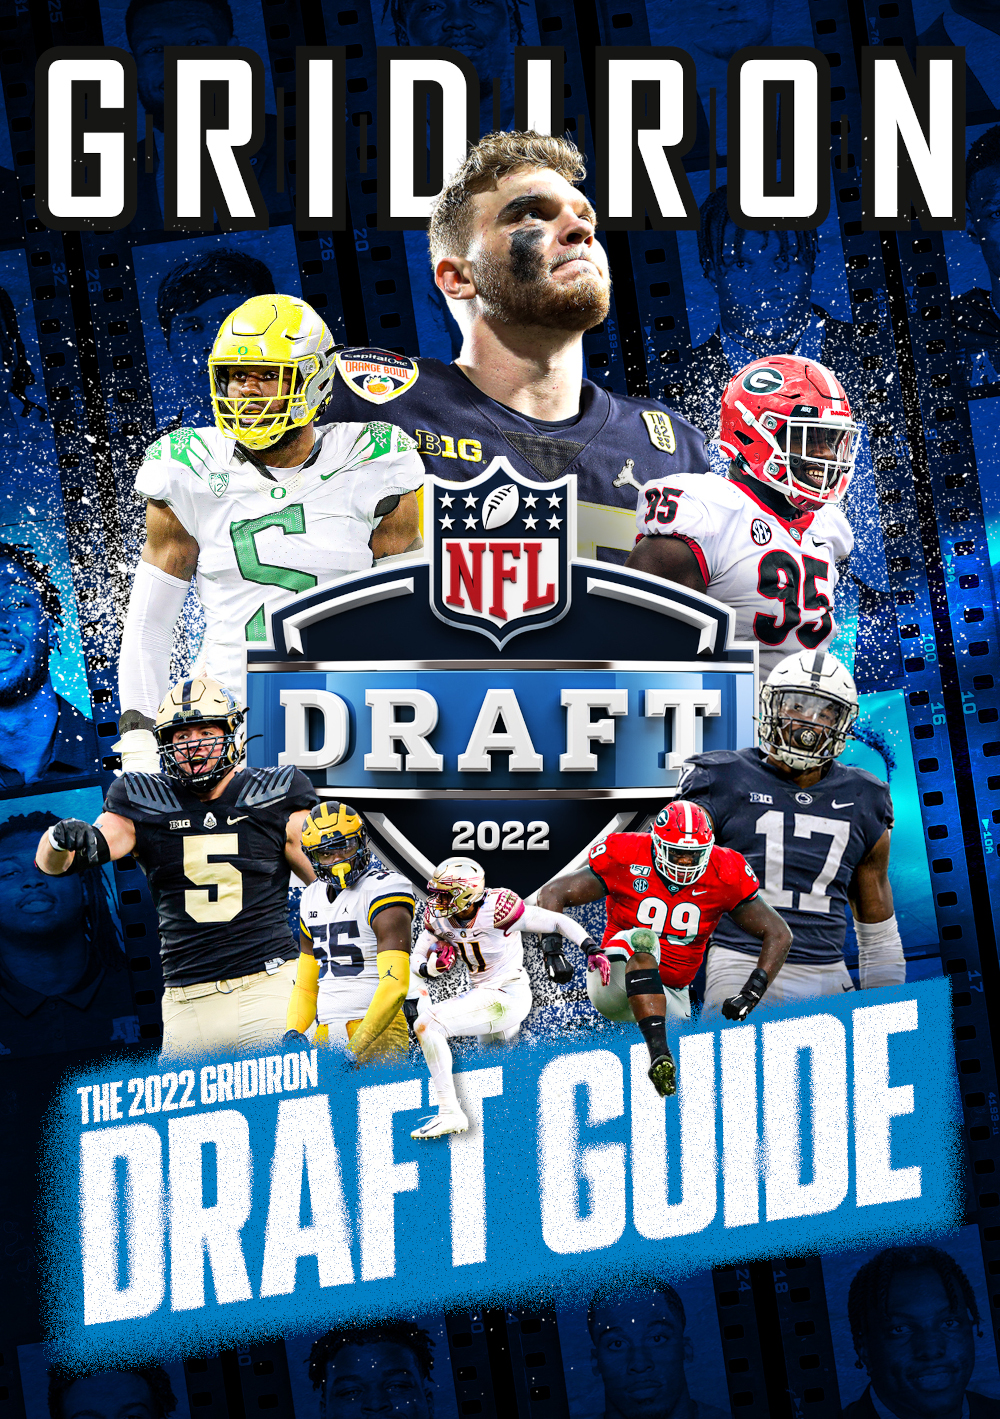 Print Version Now Available For 2022 Draft Guide